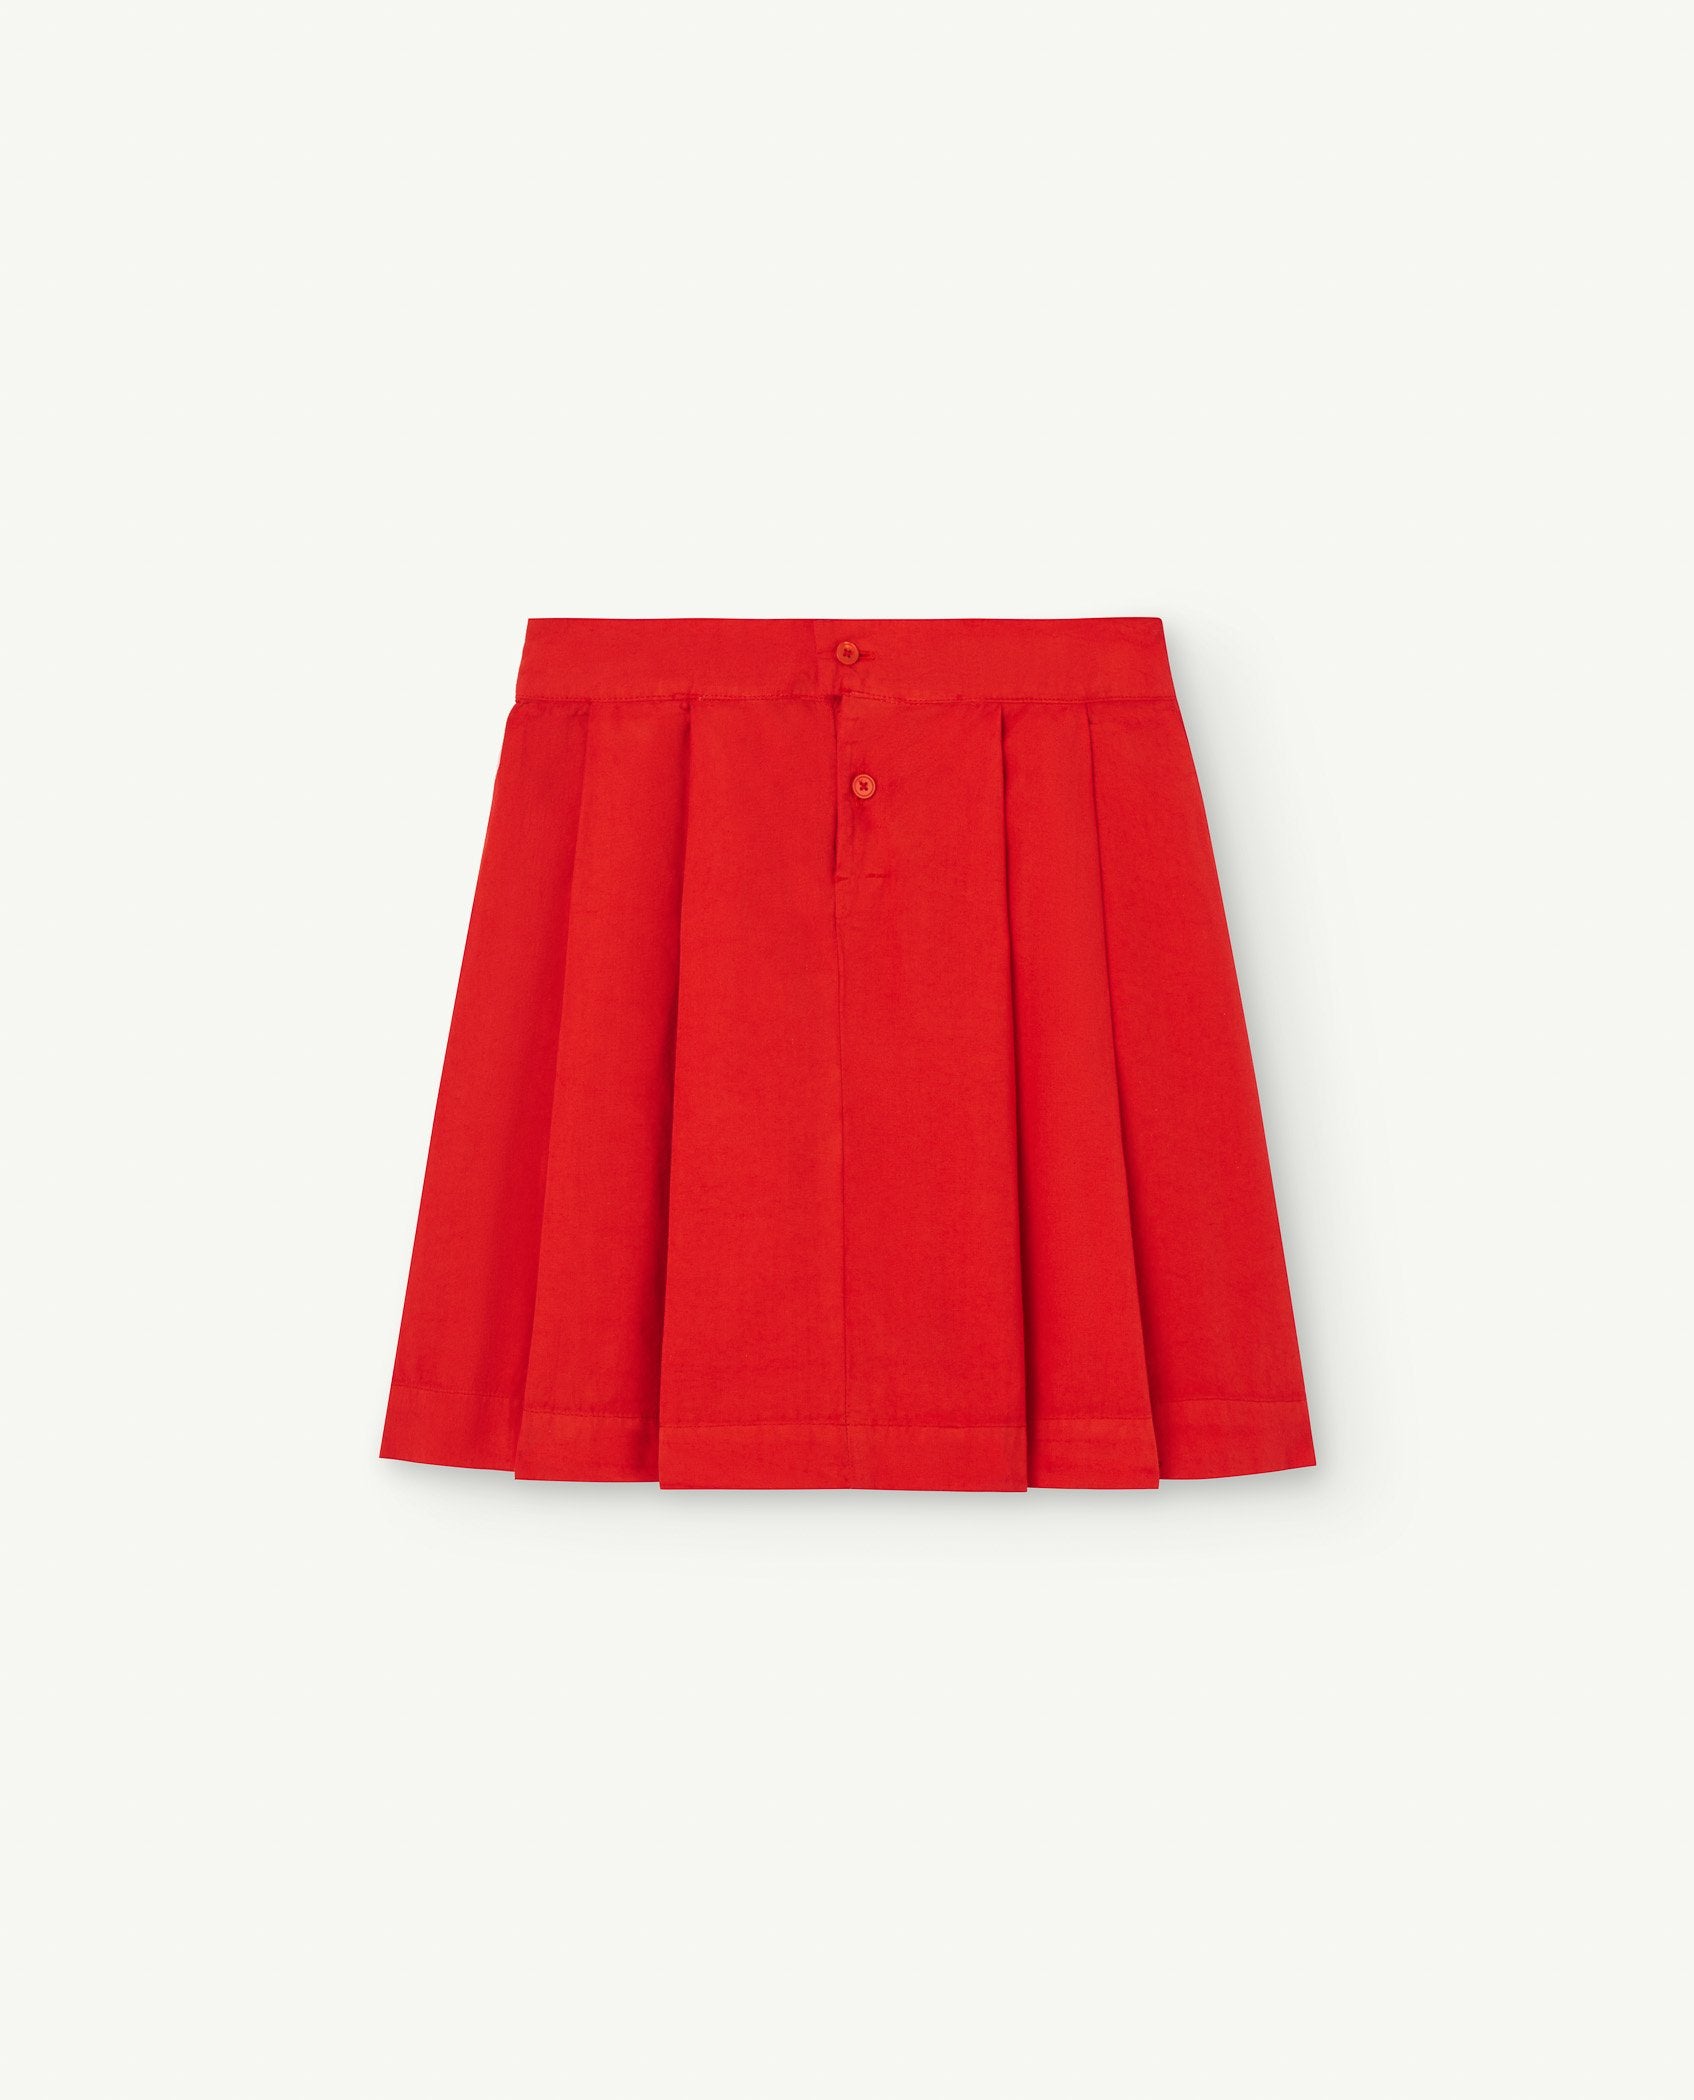 Red Turkey Skirt PRODUCT BACK